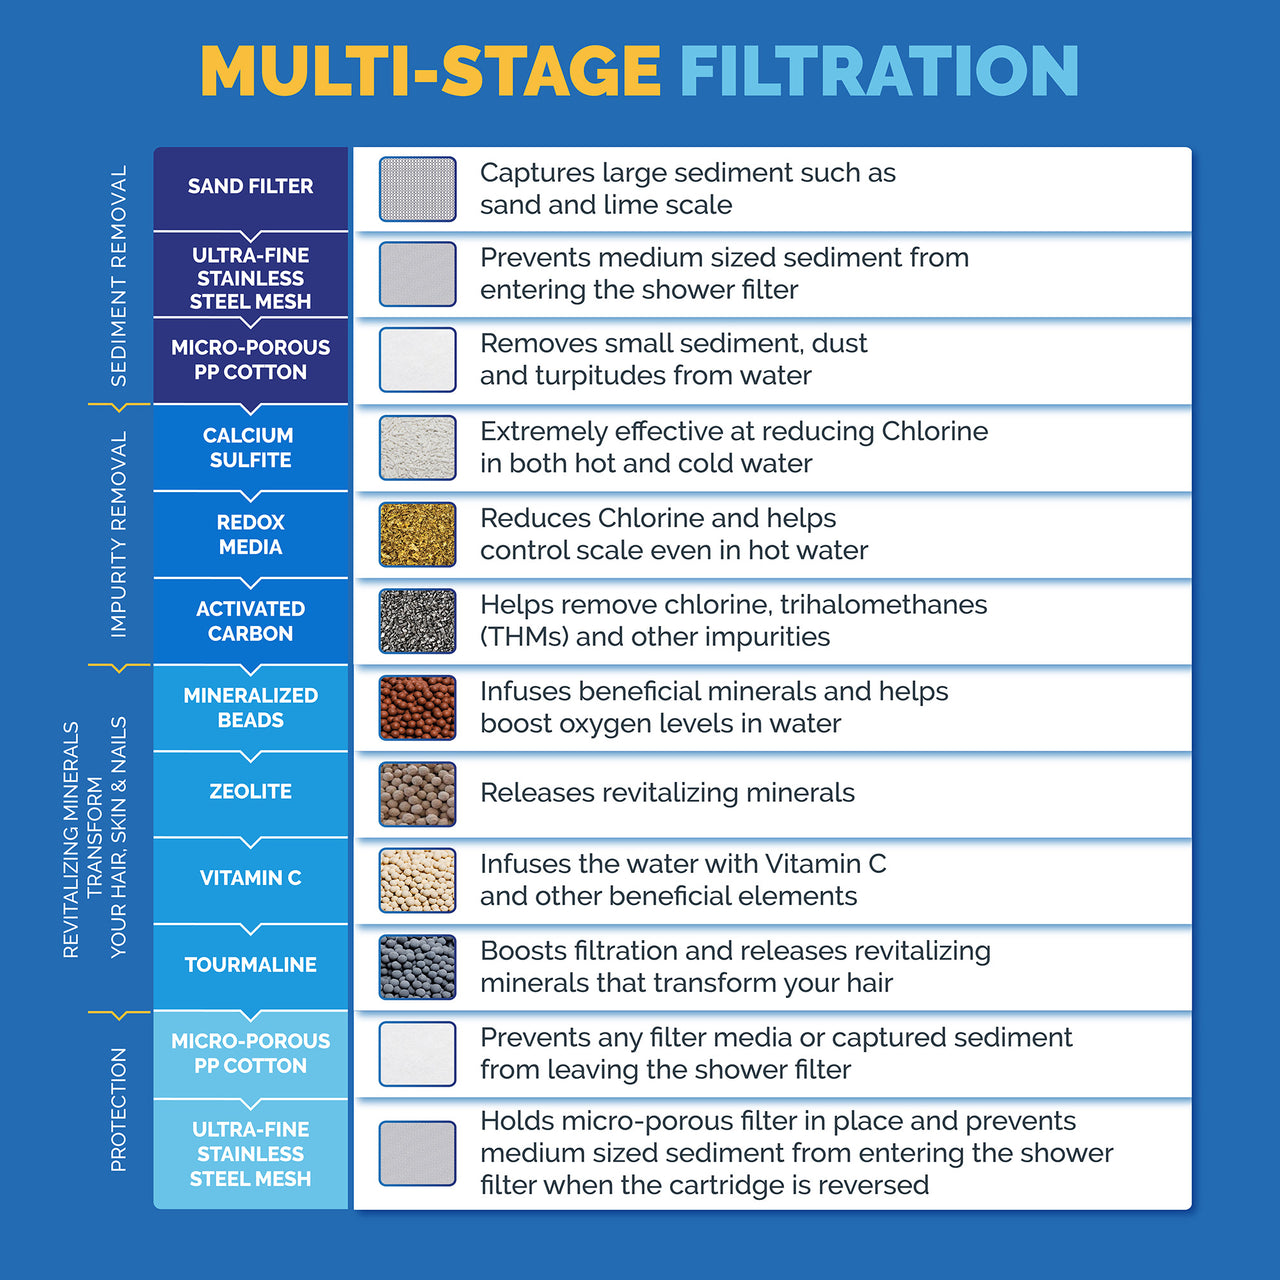 SF400 filtration stage